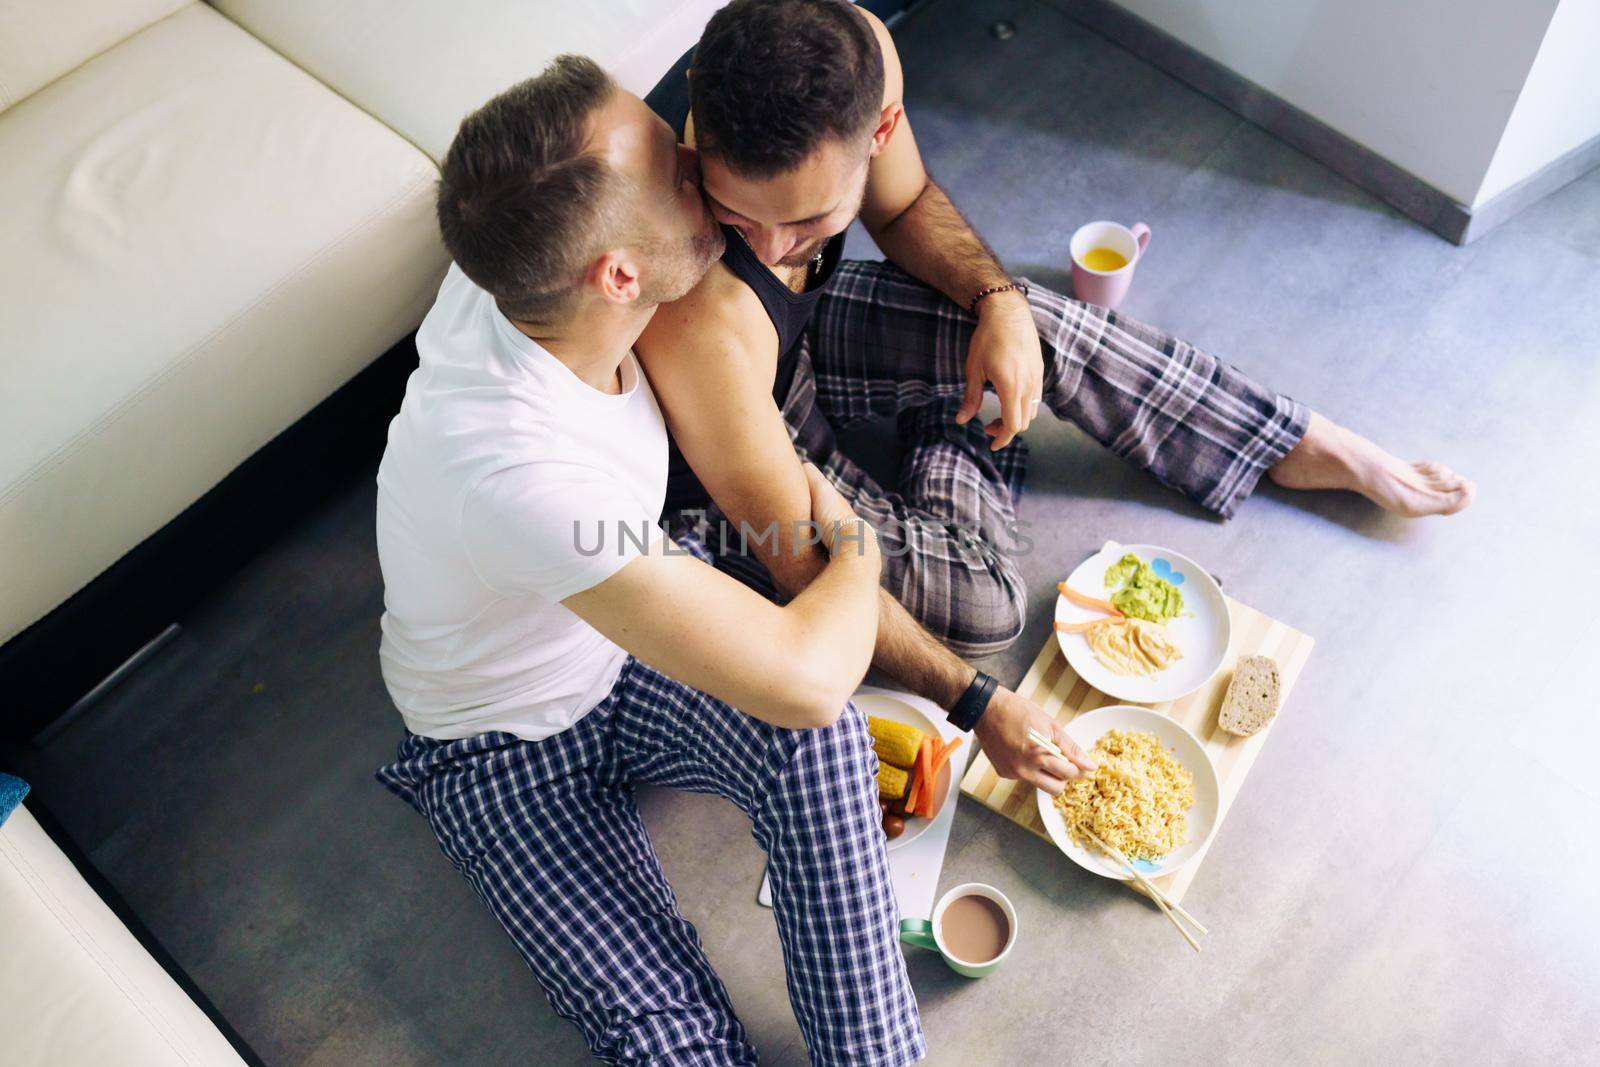 Gay couple eating together sitting on their living room floor. Homosexual lifestyle concept.